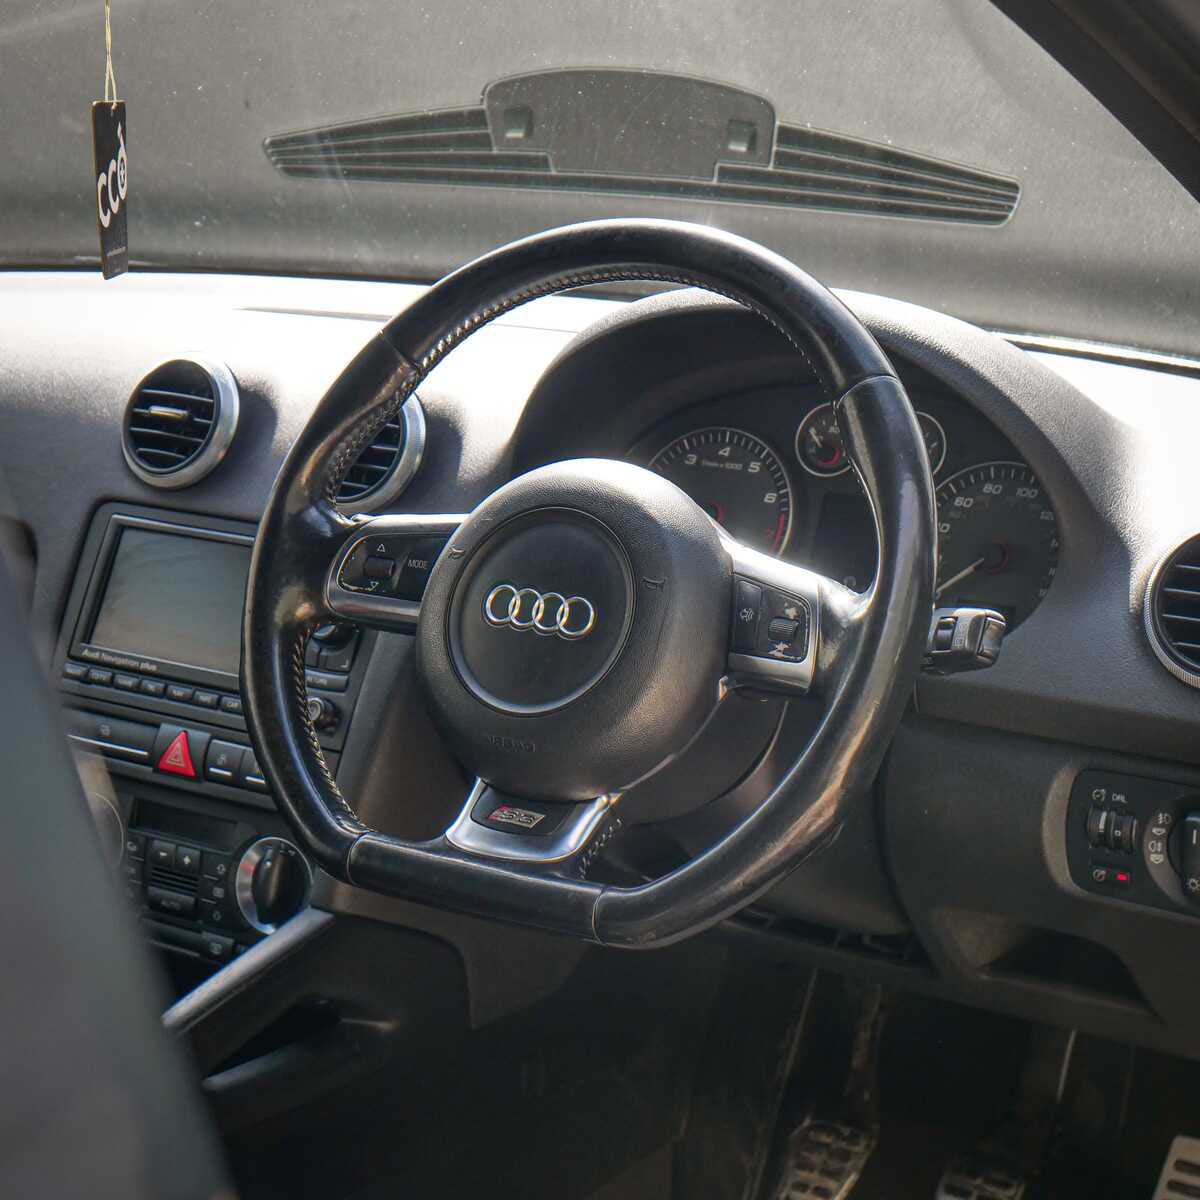 The interior of an Audi S3